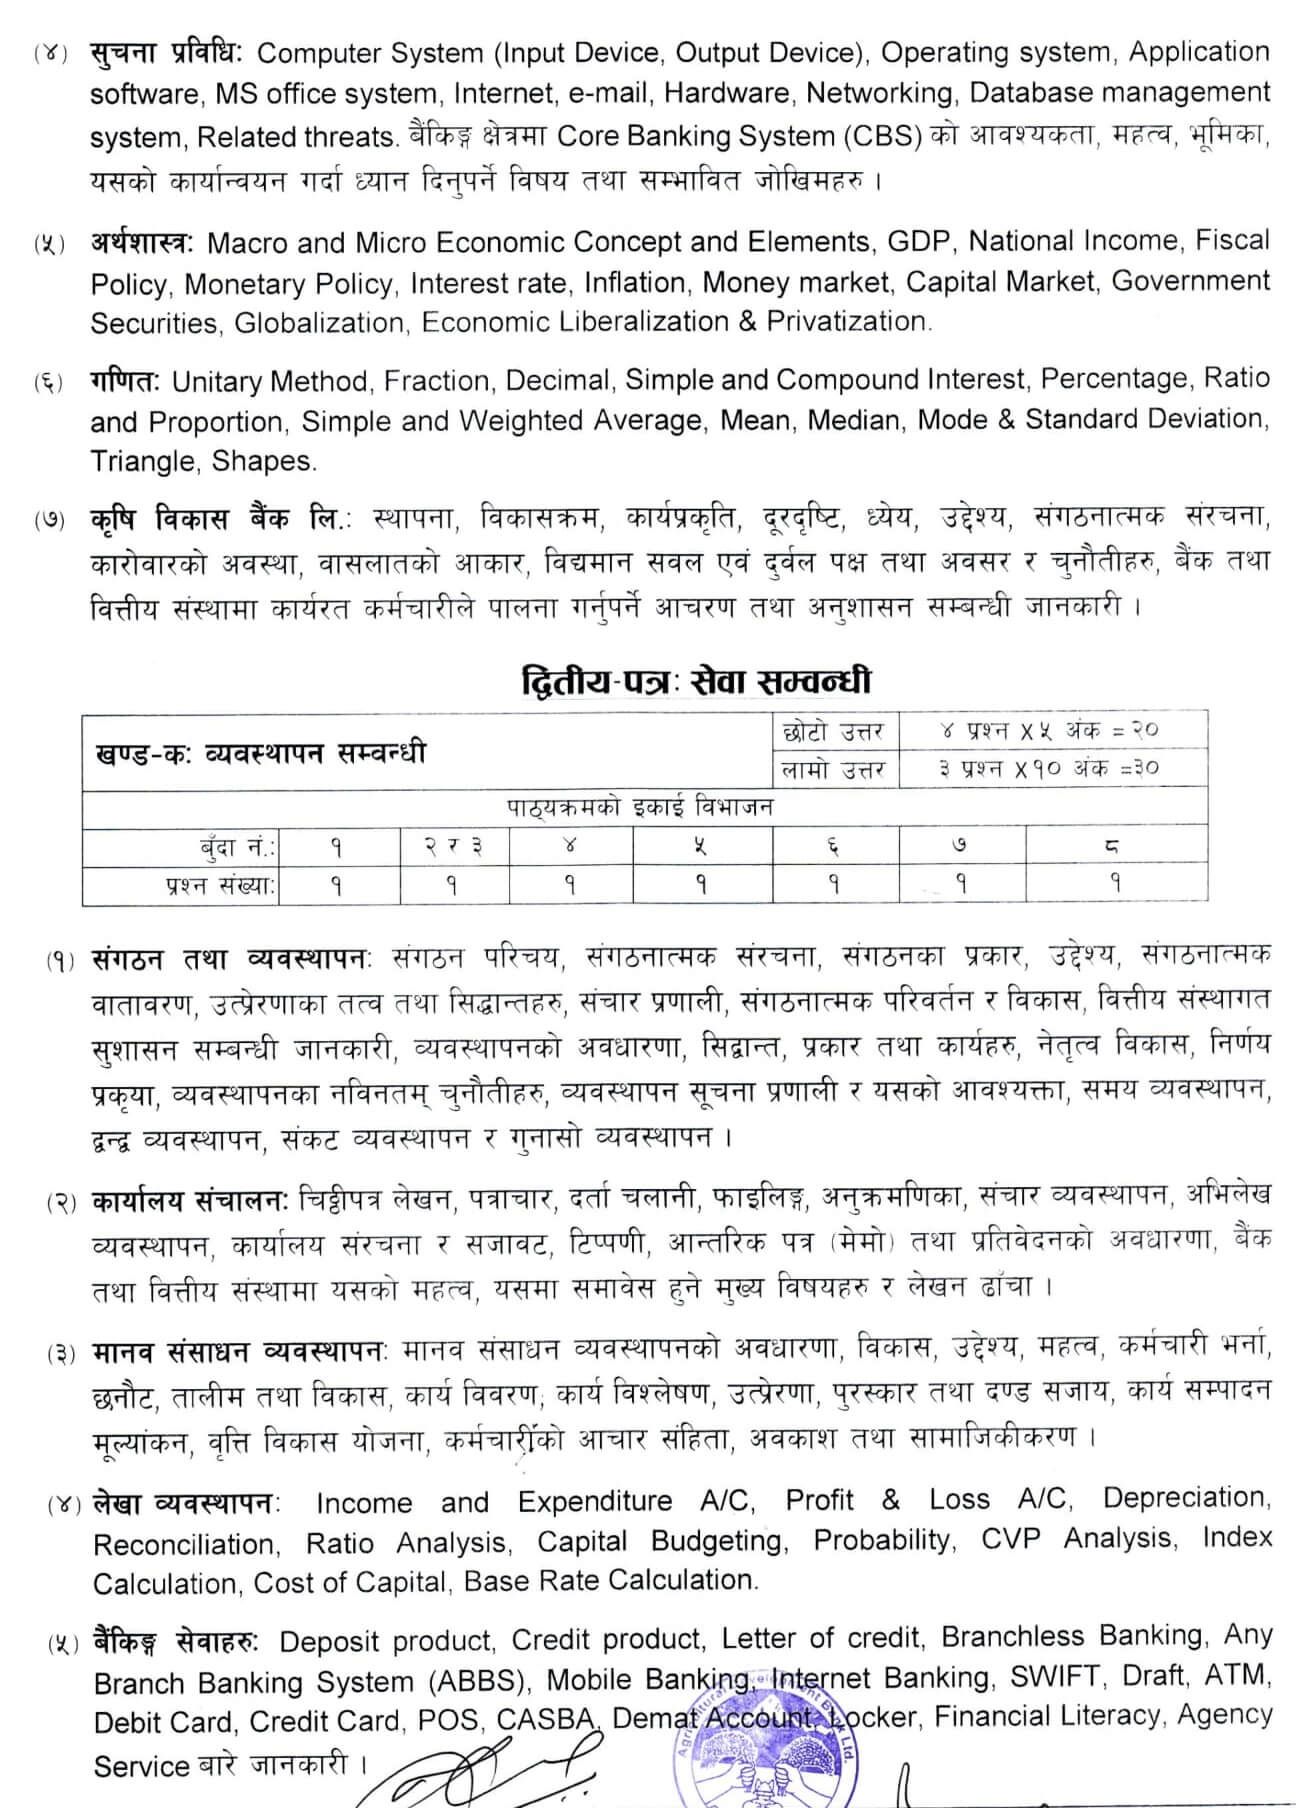 Syllabus of Agricultural Development Bank Level 5 Business Assistant